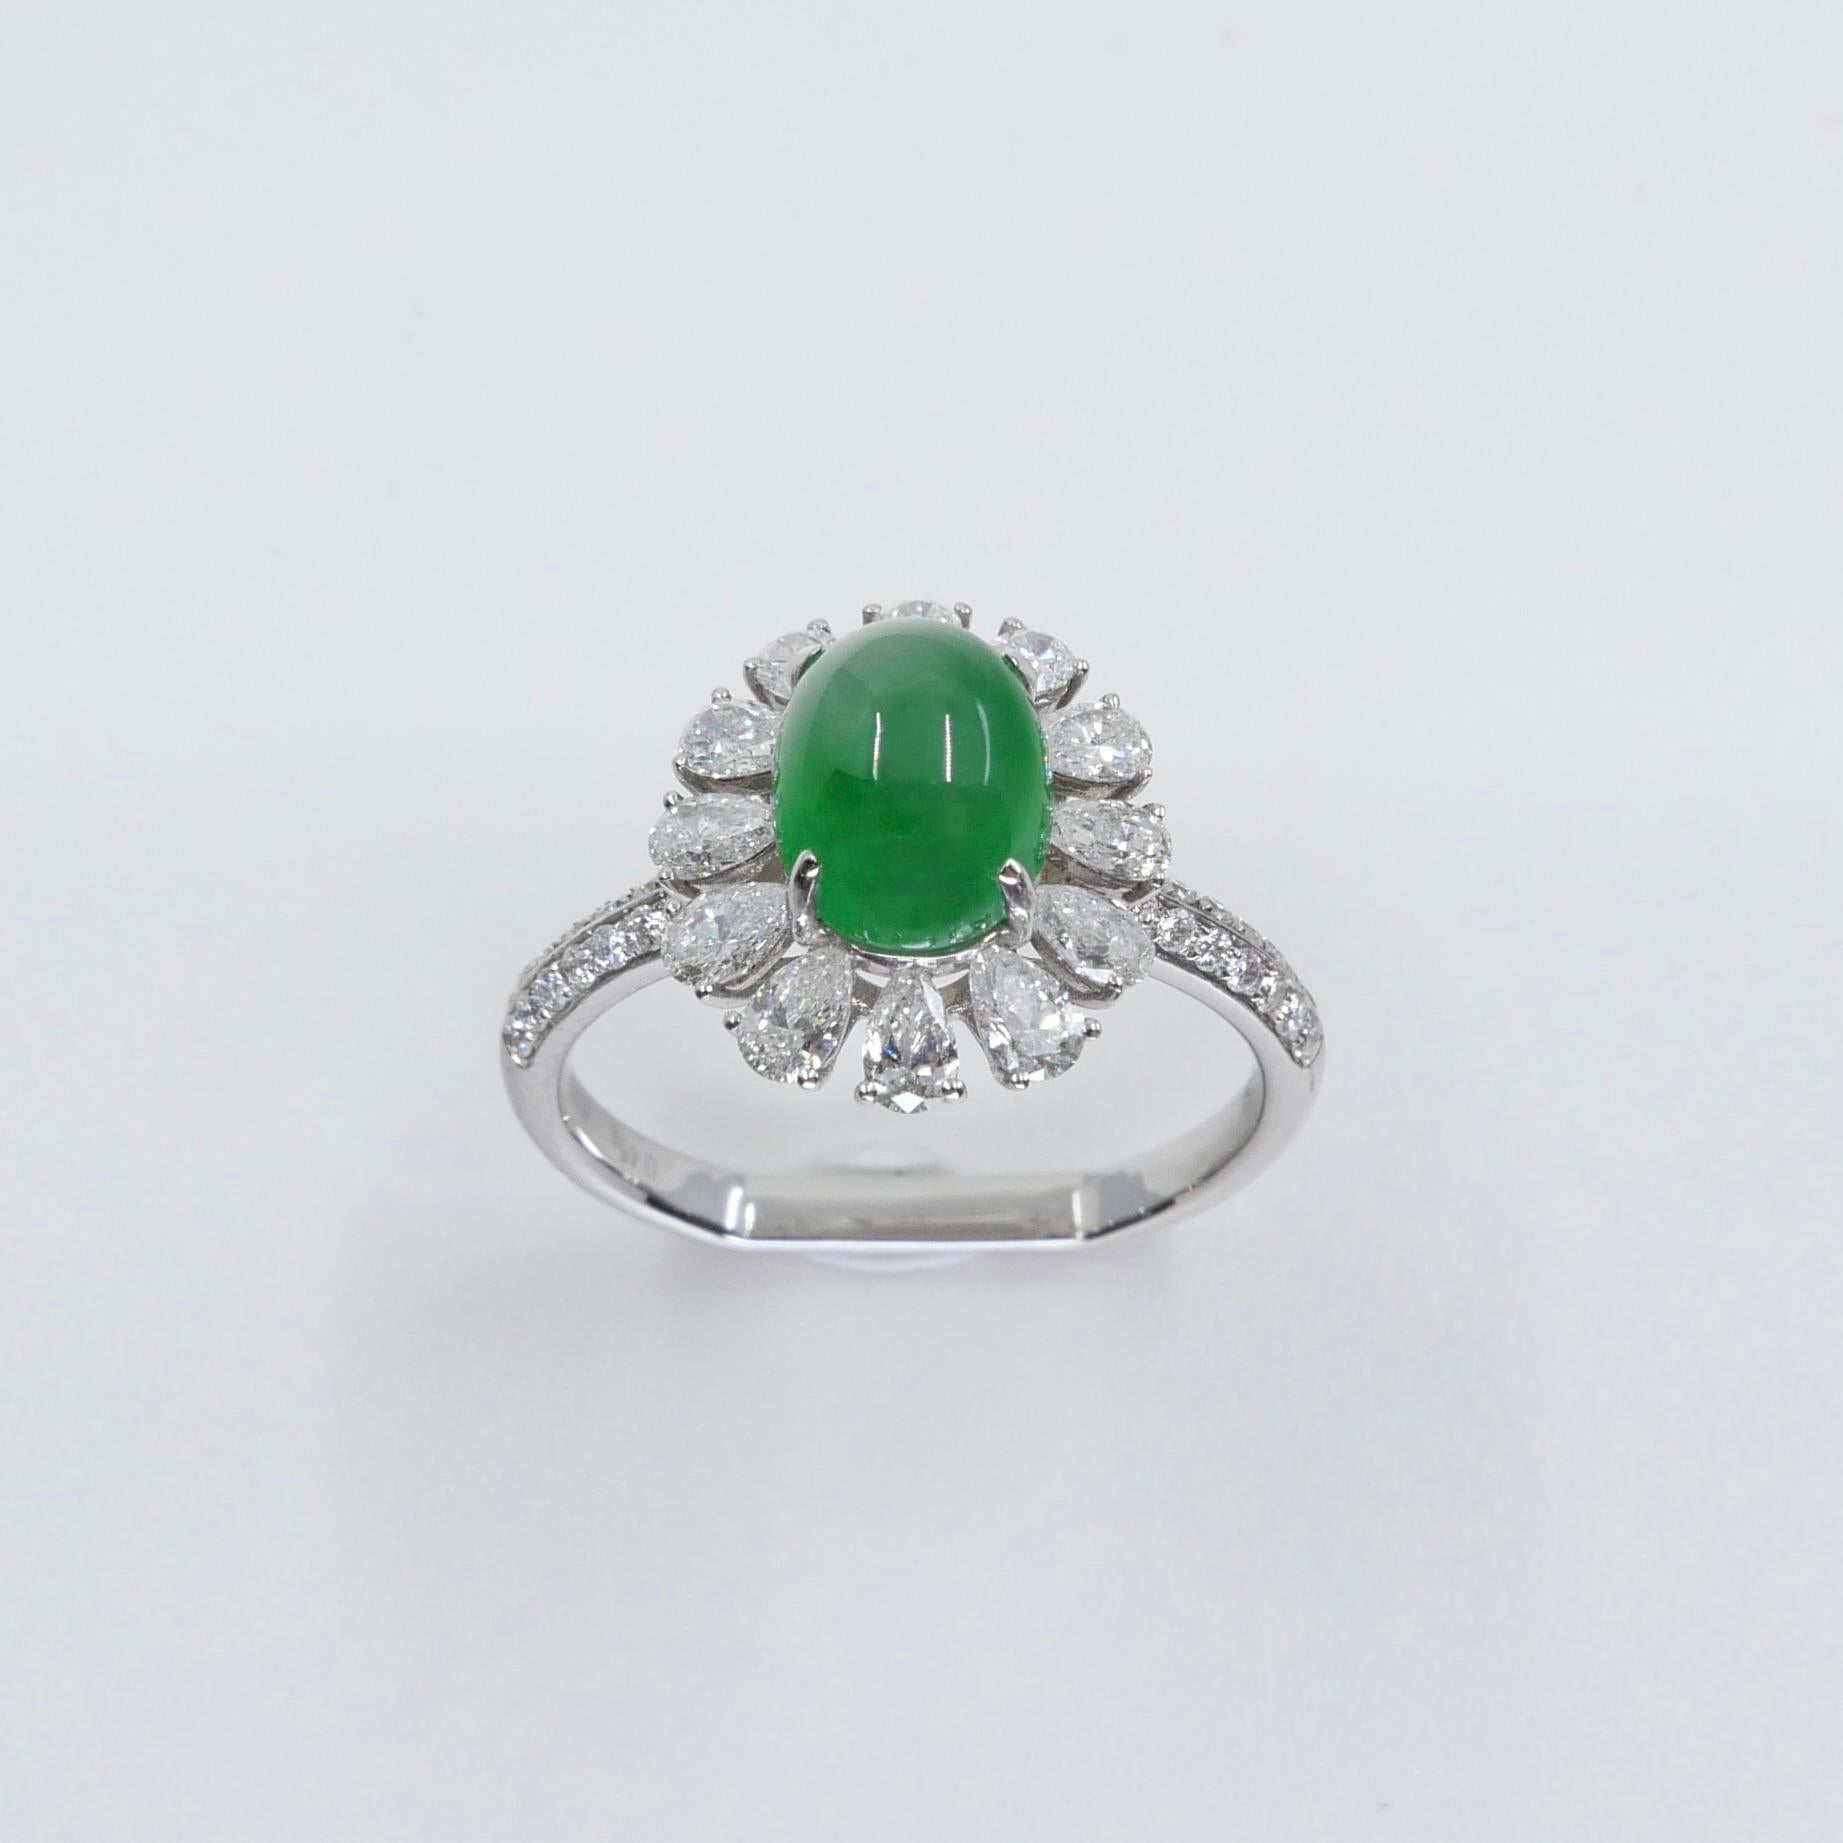 Certified Natural Type A Jadeite Jade & Diamond Cocktail Ring, Apple Green Color For Sale 3